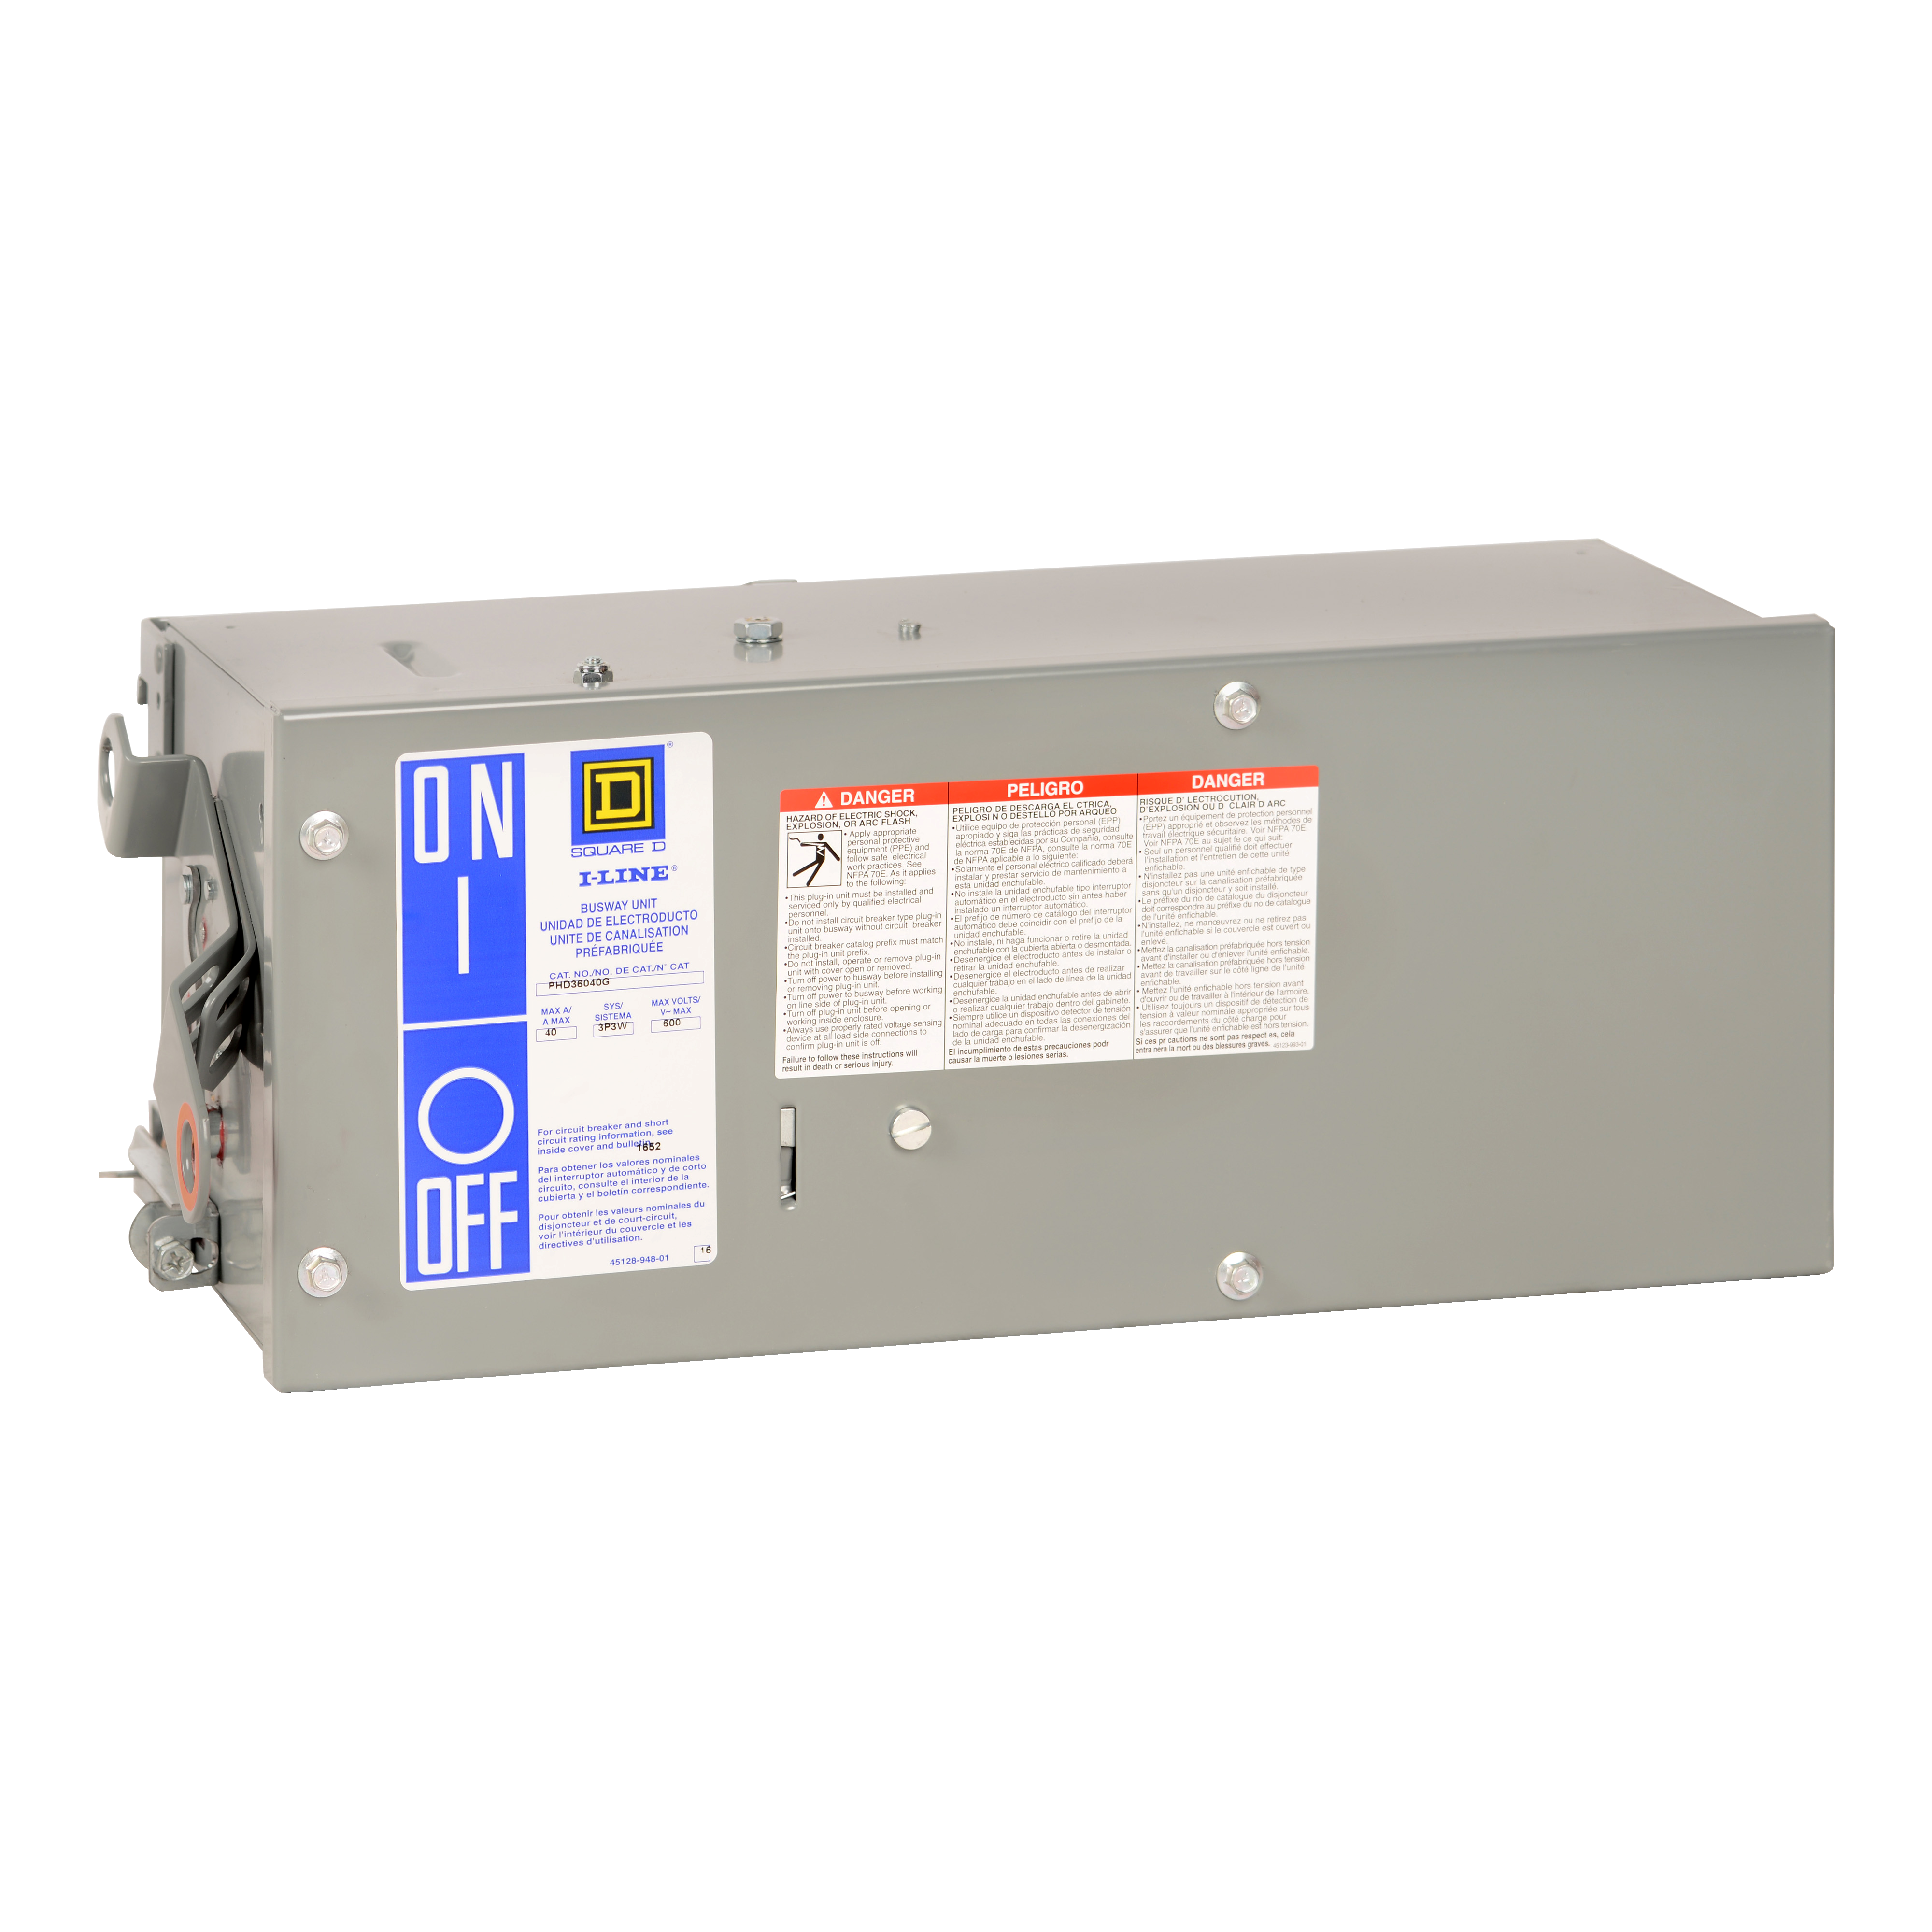 Plug-in unit, I-Line Busway, H-frame, 80A, 3 phase, 4 wire, 600VAC, 50kA, ground, neutral